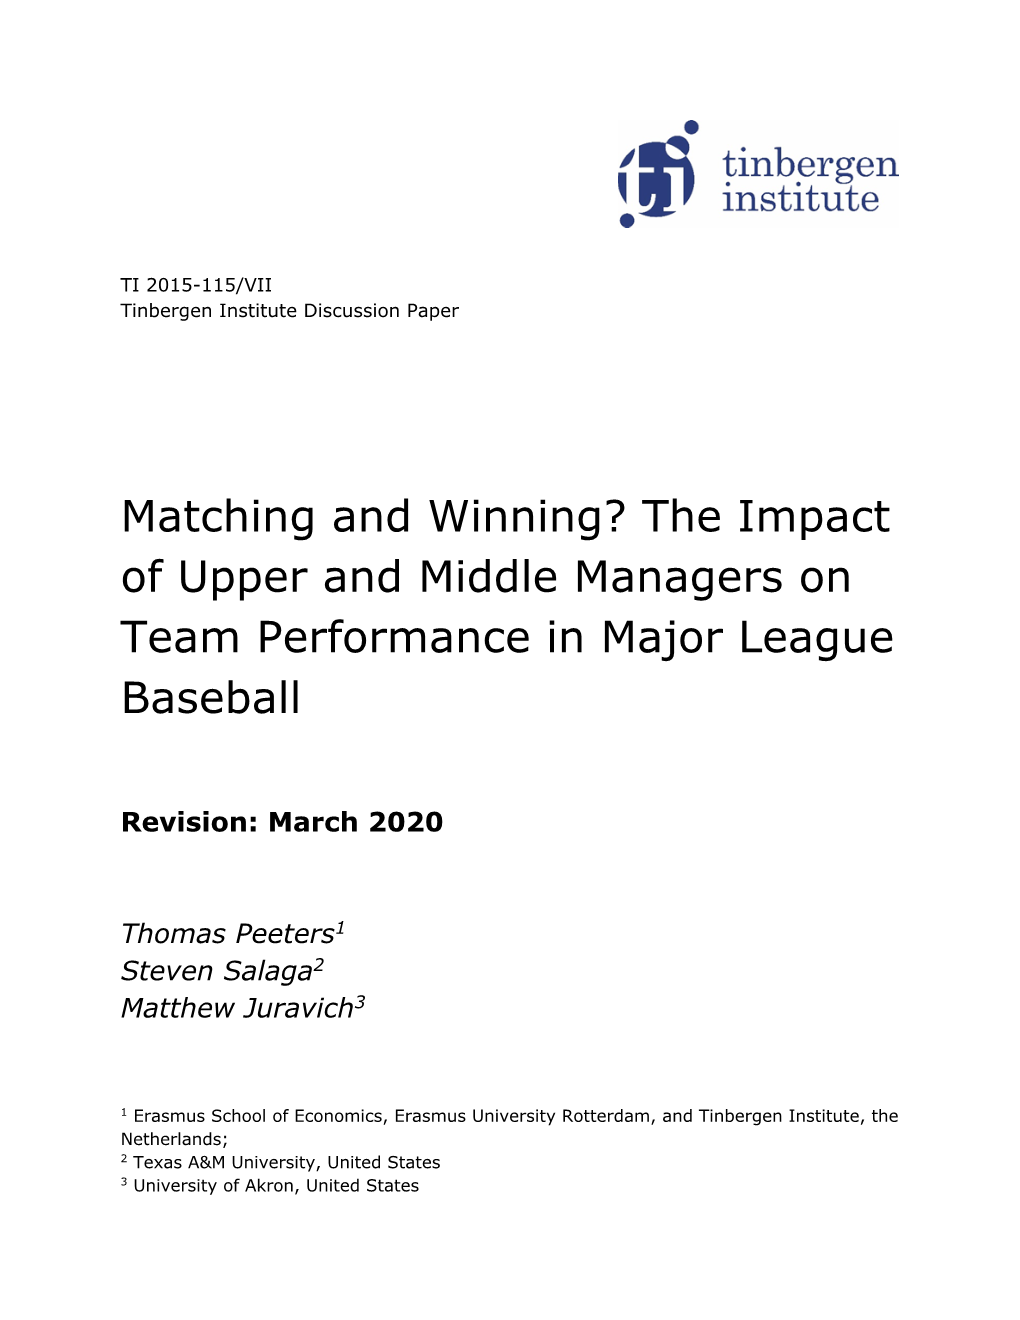 The Impact of Upper and Middle Managers on Team Performance in Major League Baseball